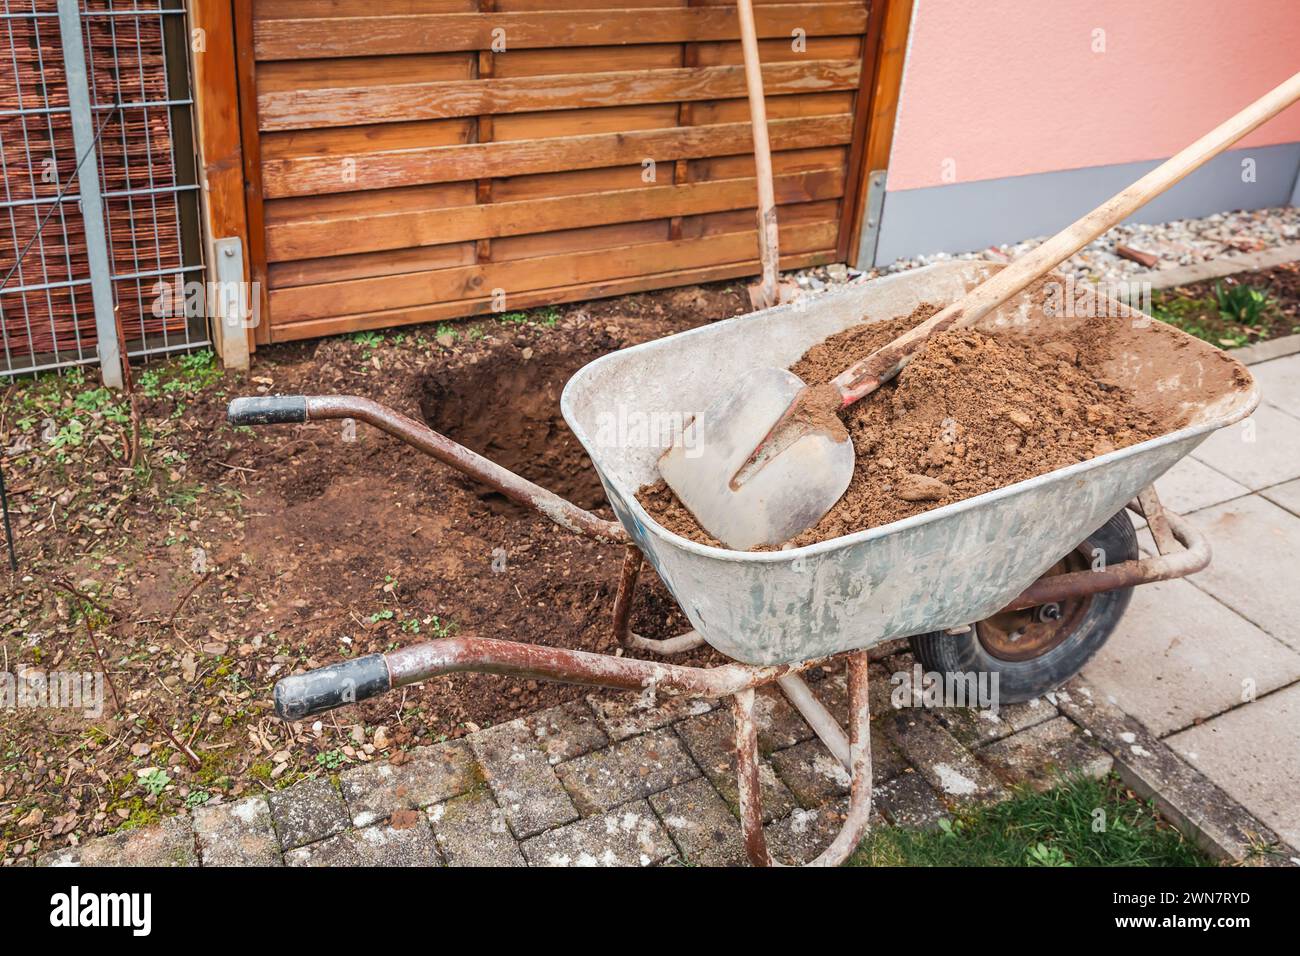 Wheelbarrow with soil and shovel, digging a hole for planting a tree or construction Stock Photo